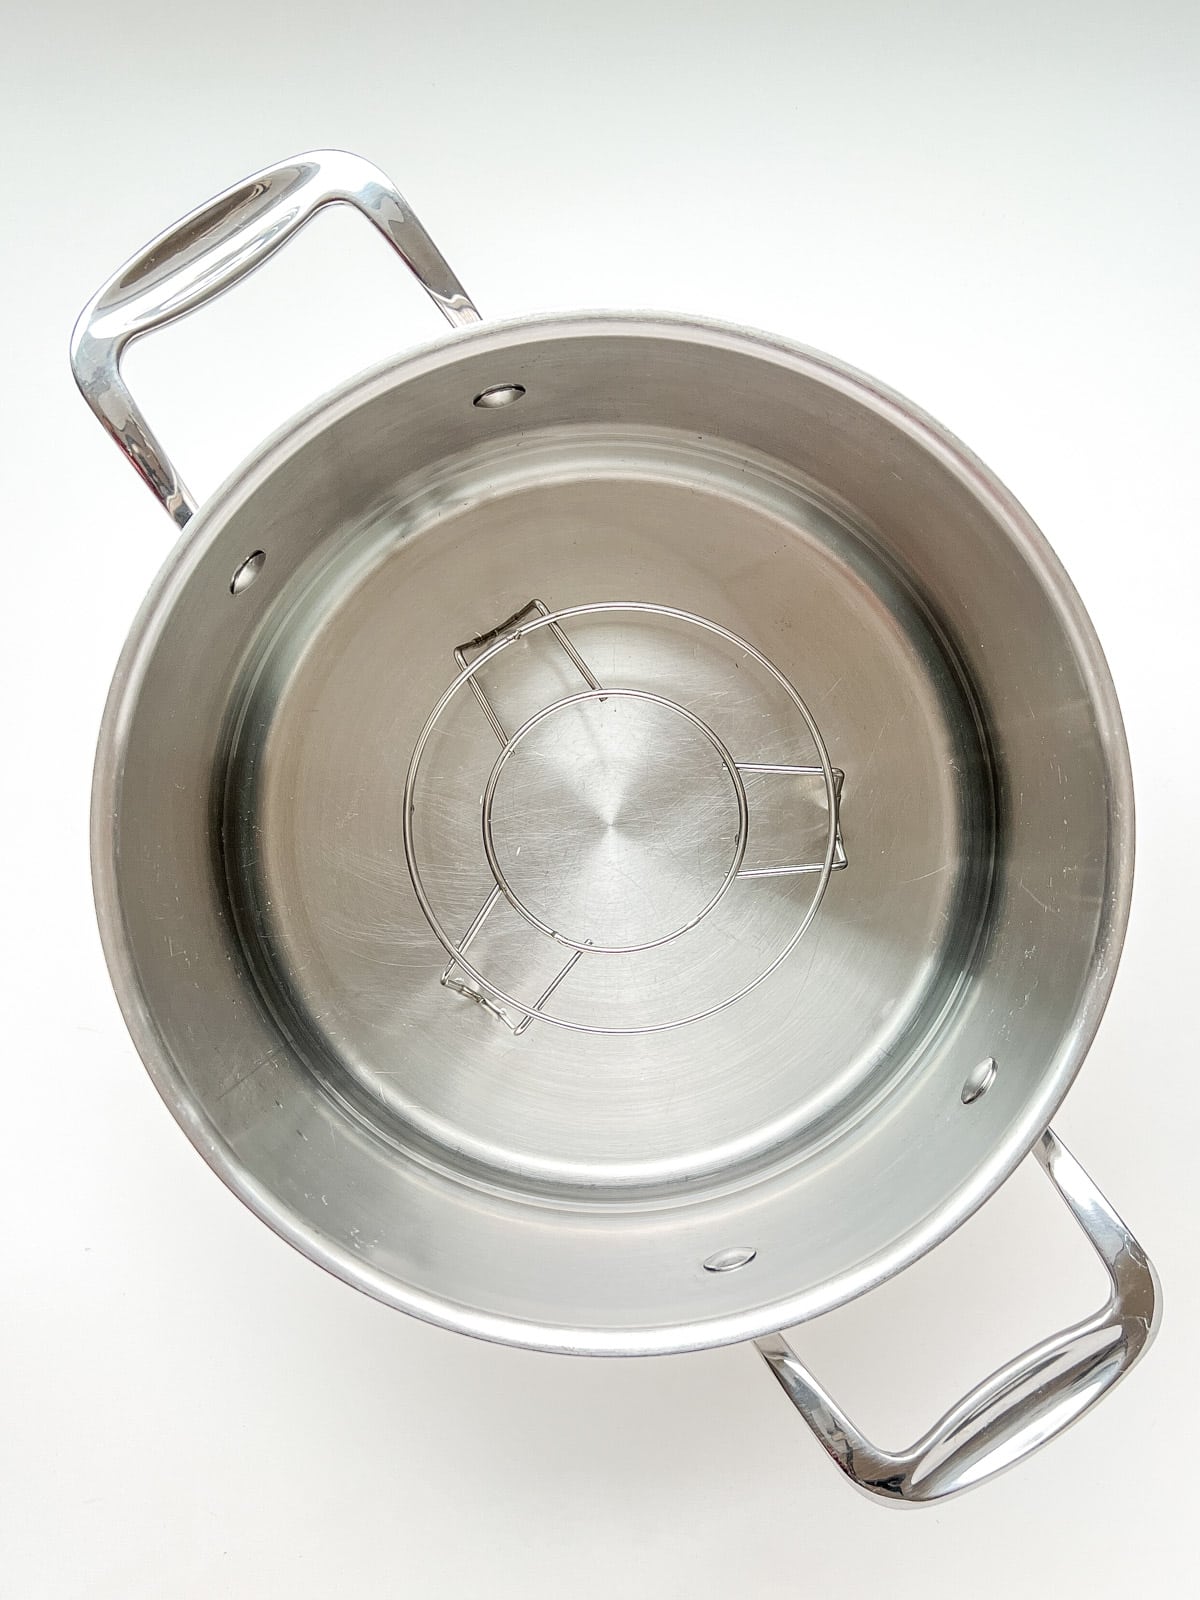 An image of a metal trivet inside a pot to be used as a steamer.